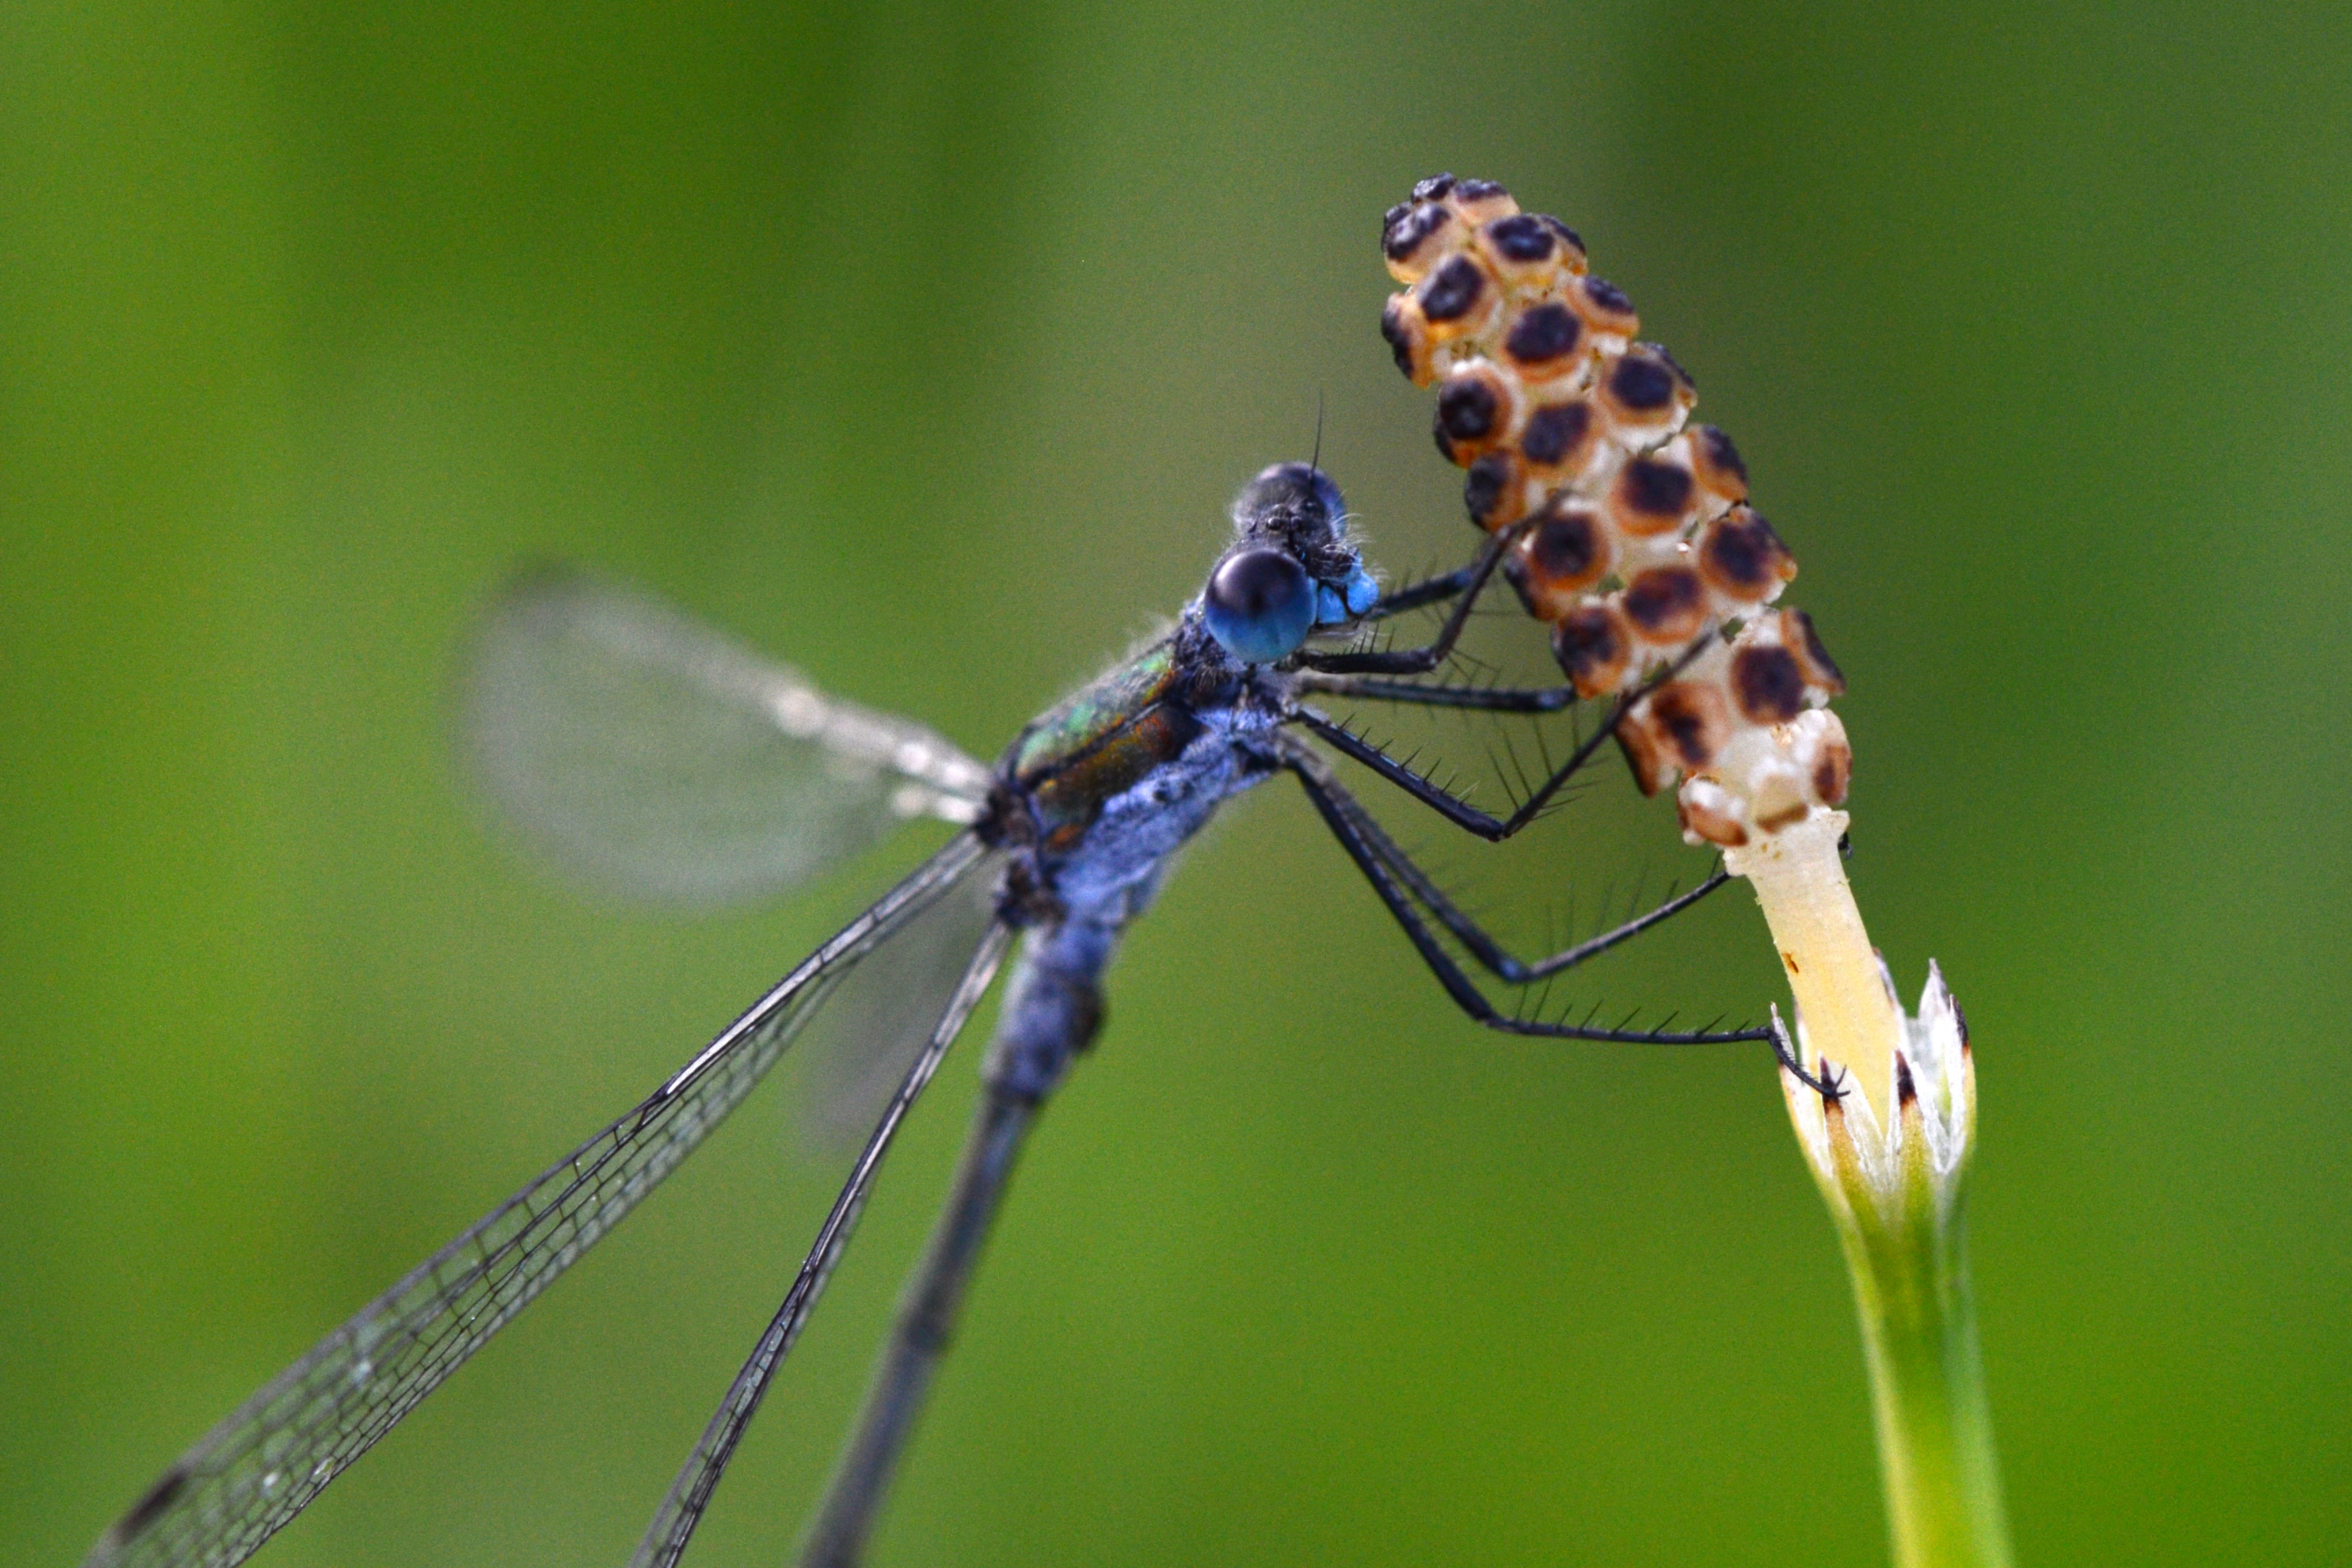 File:Blue dragonfly (9572801754).jpg - Wikimedia Commons